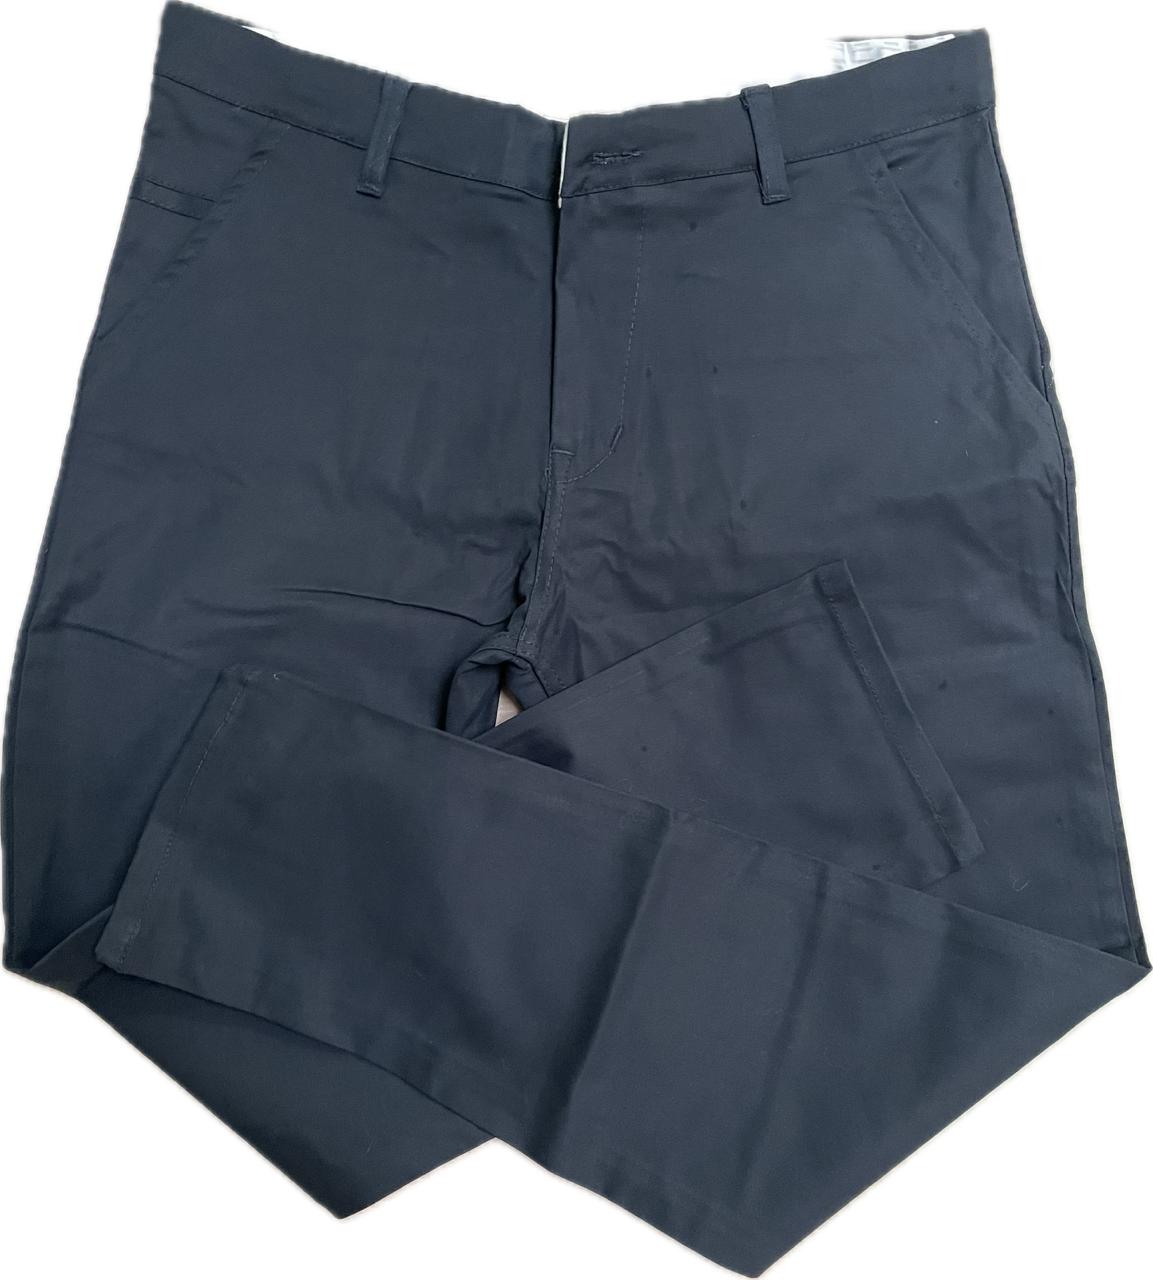 Navy Blue Cotton Trouser with stretchable